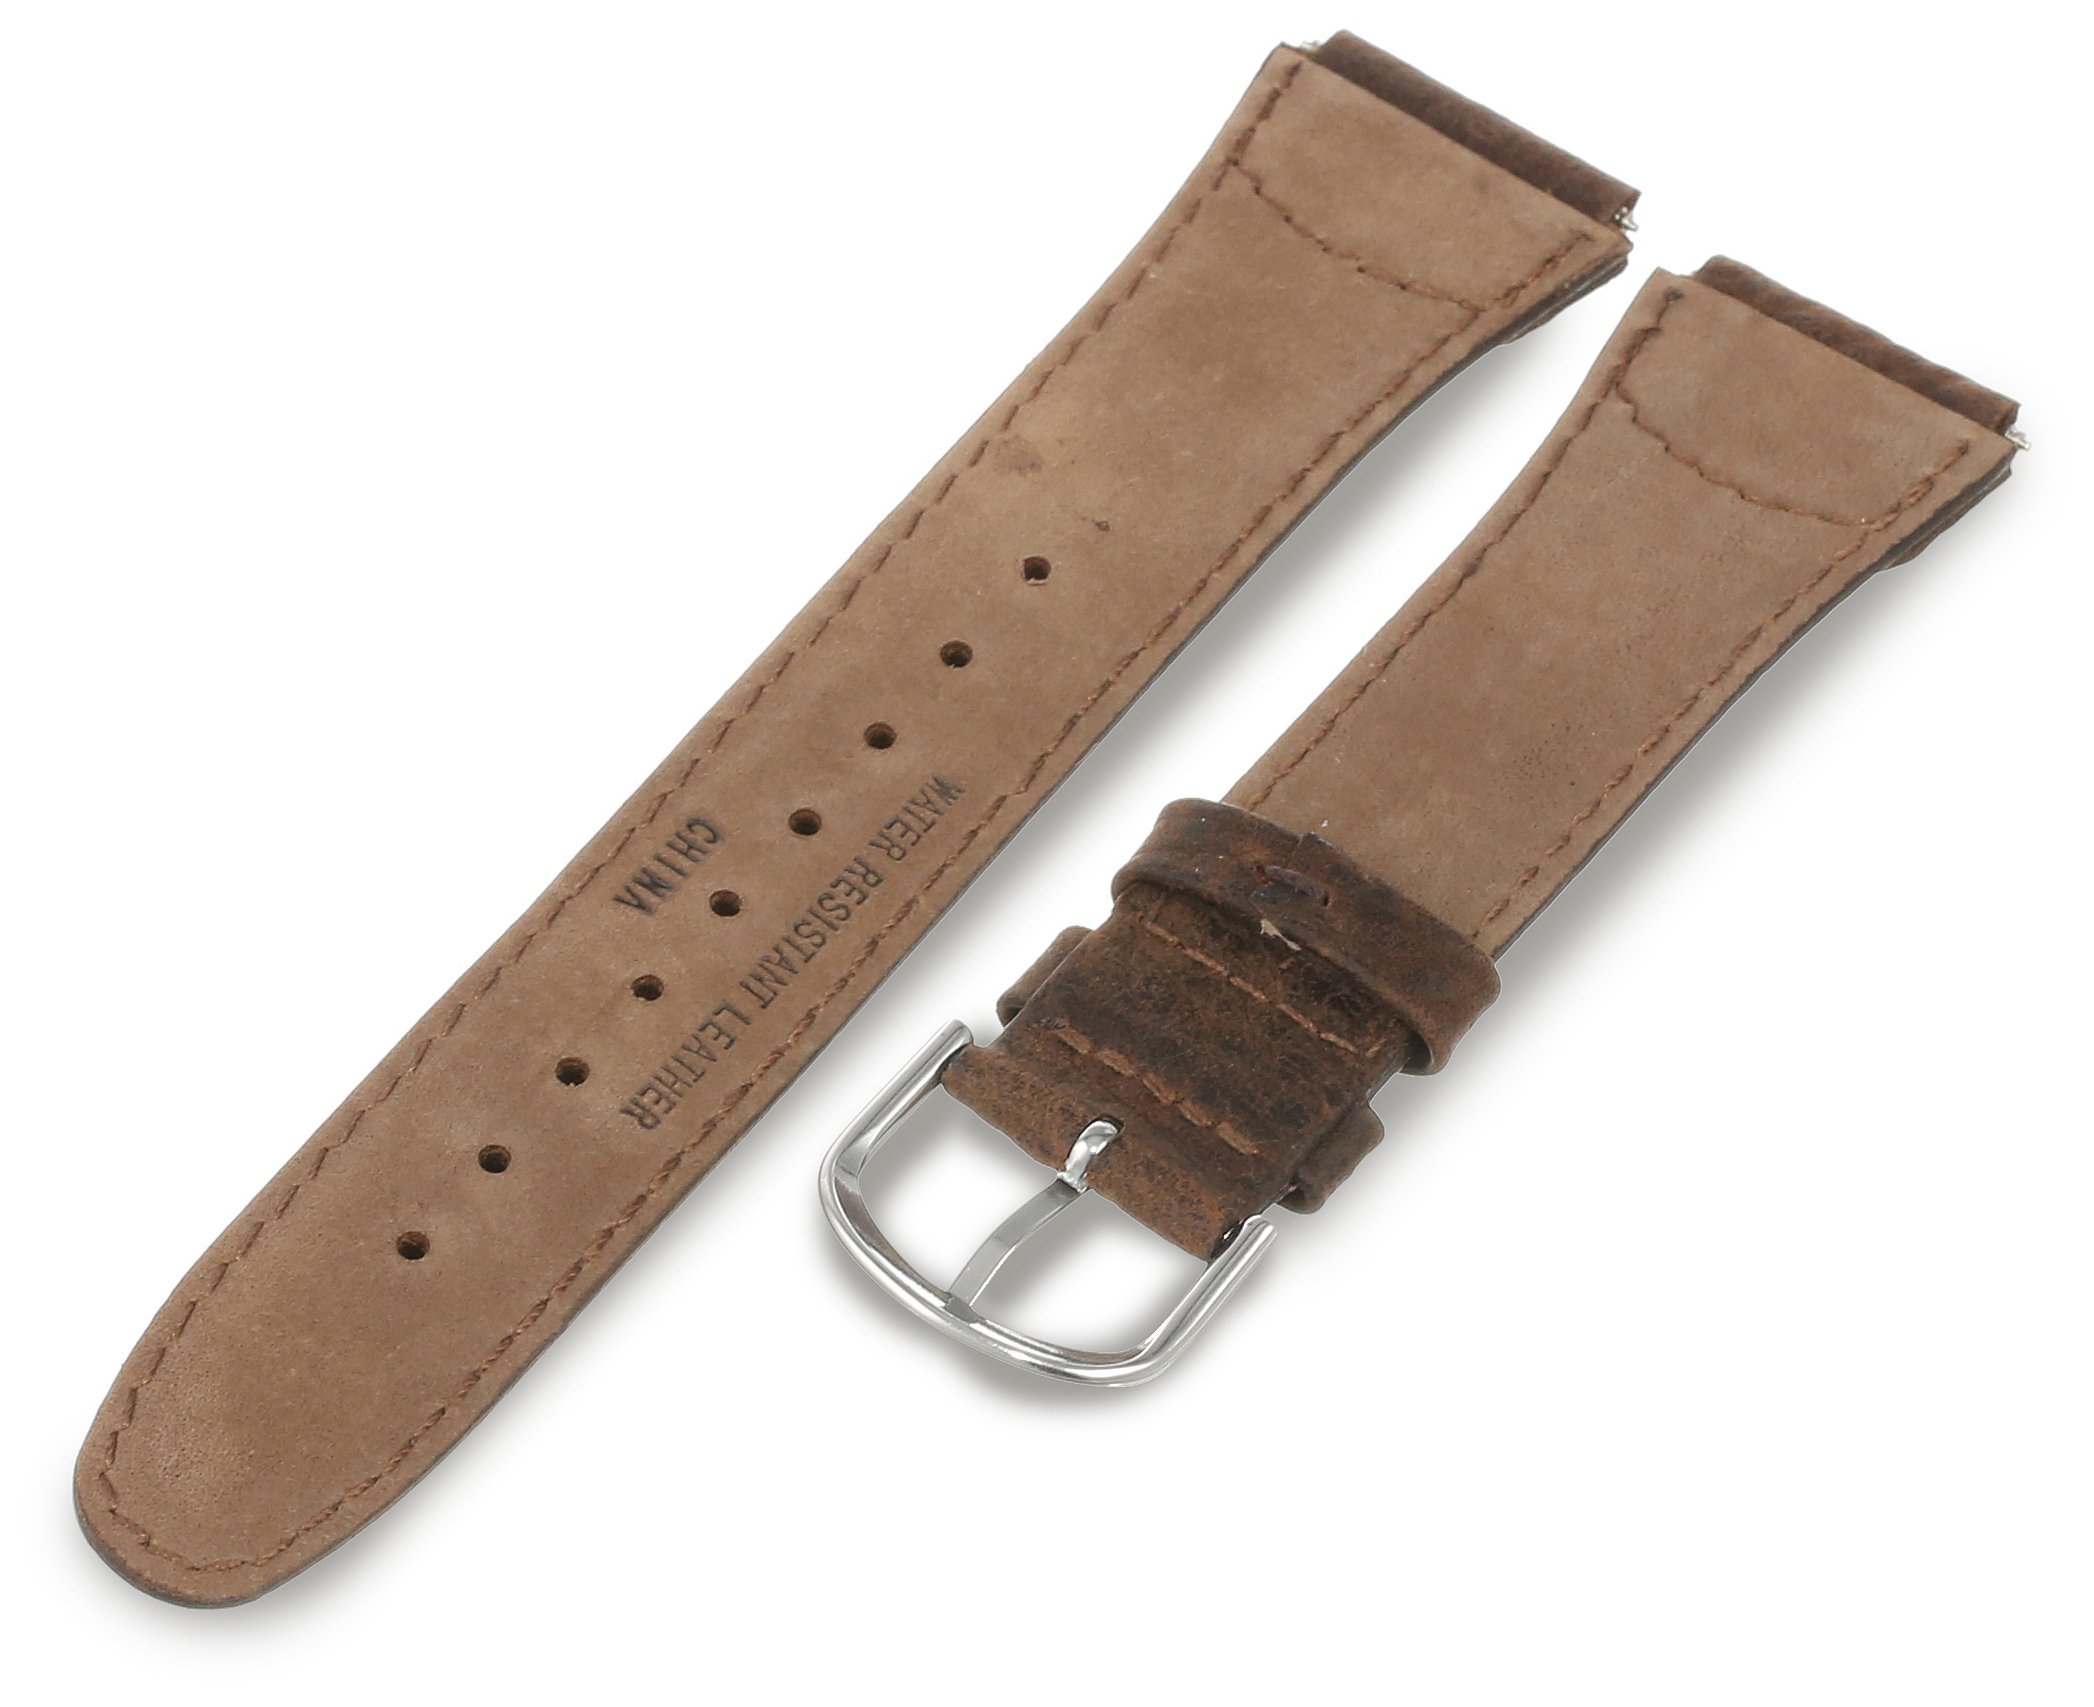 Voguestrap TX444381 Allstrap 20mm Brown Regular-Length Fits Timex Expedition T44381/T47012 Water Resist Watchband